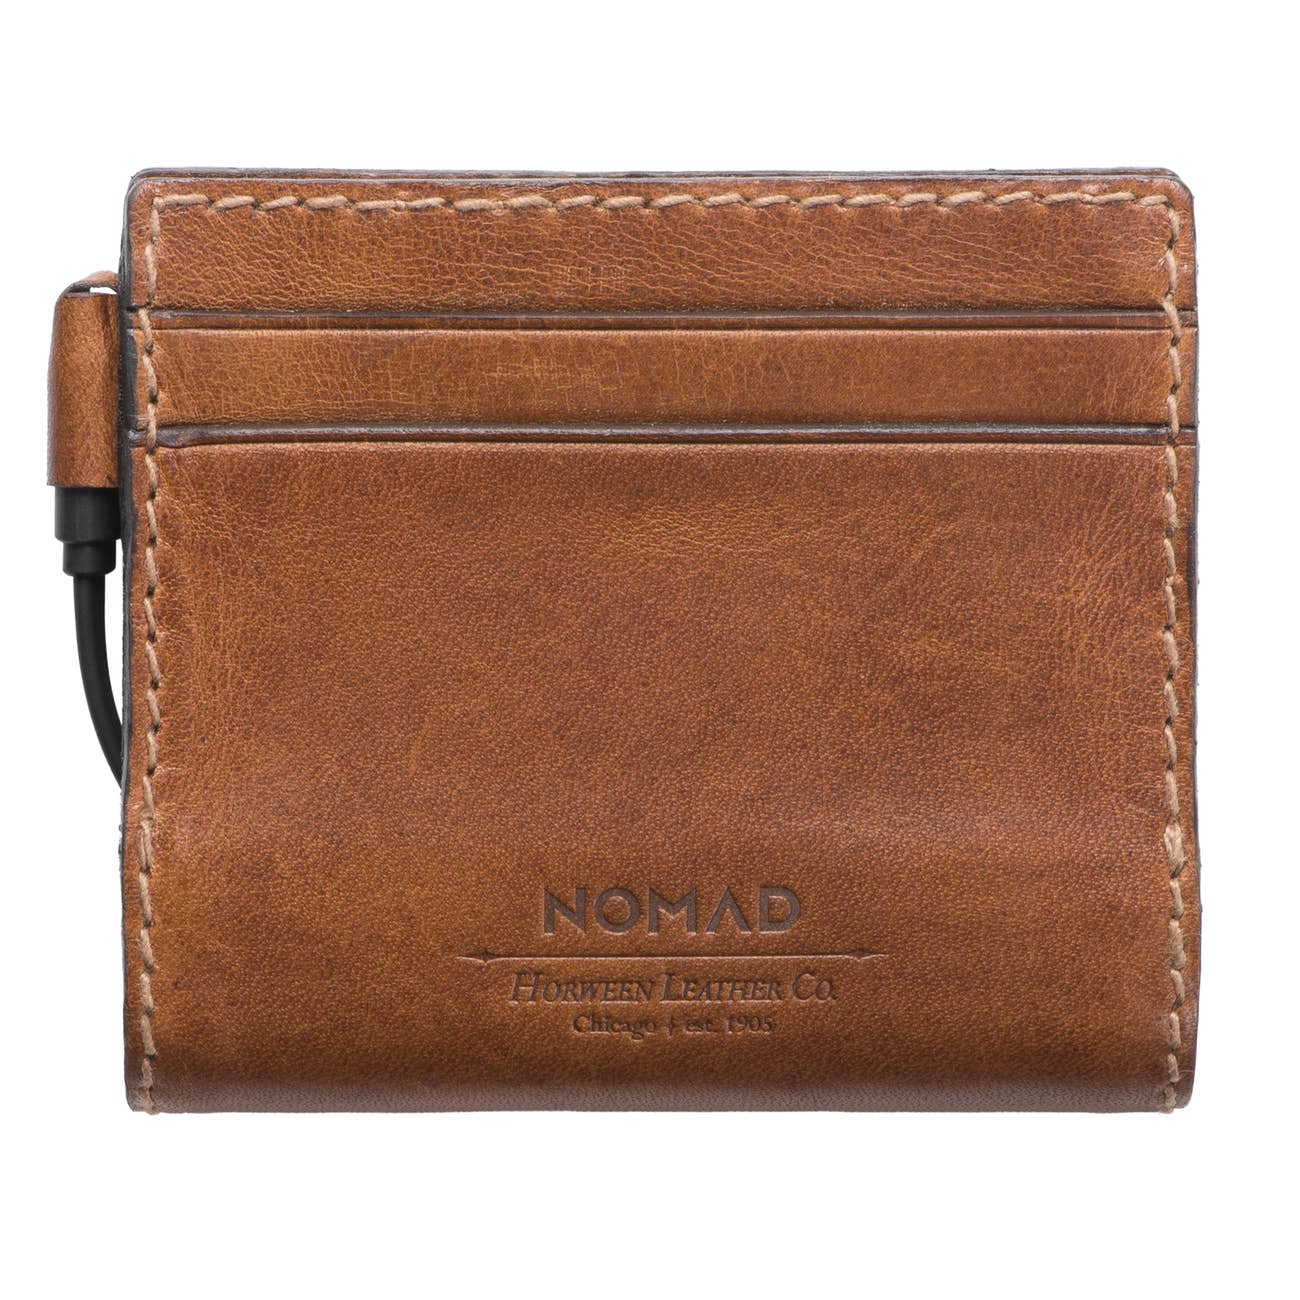 Nomad Slim Charging Wallet Front View